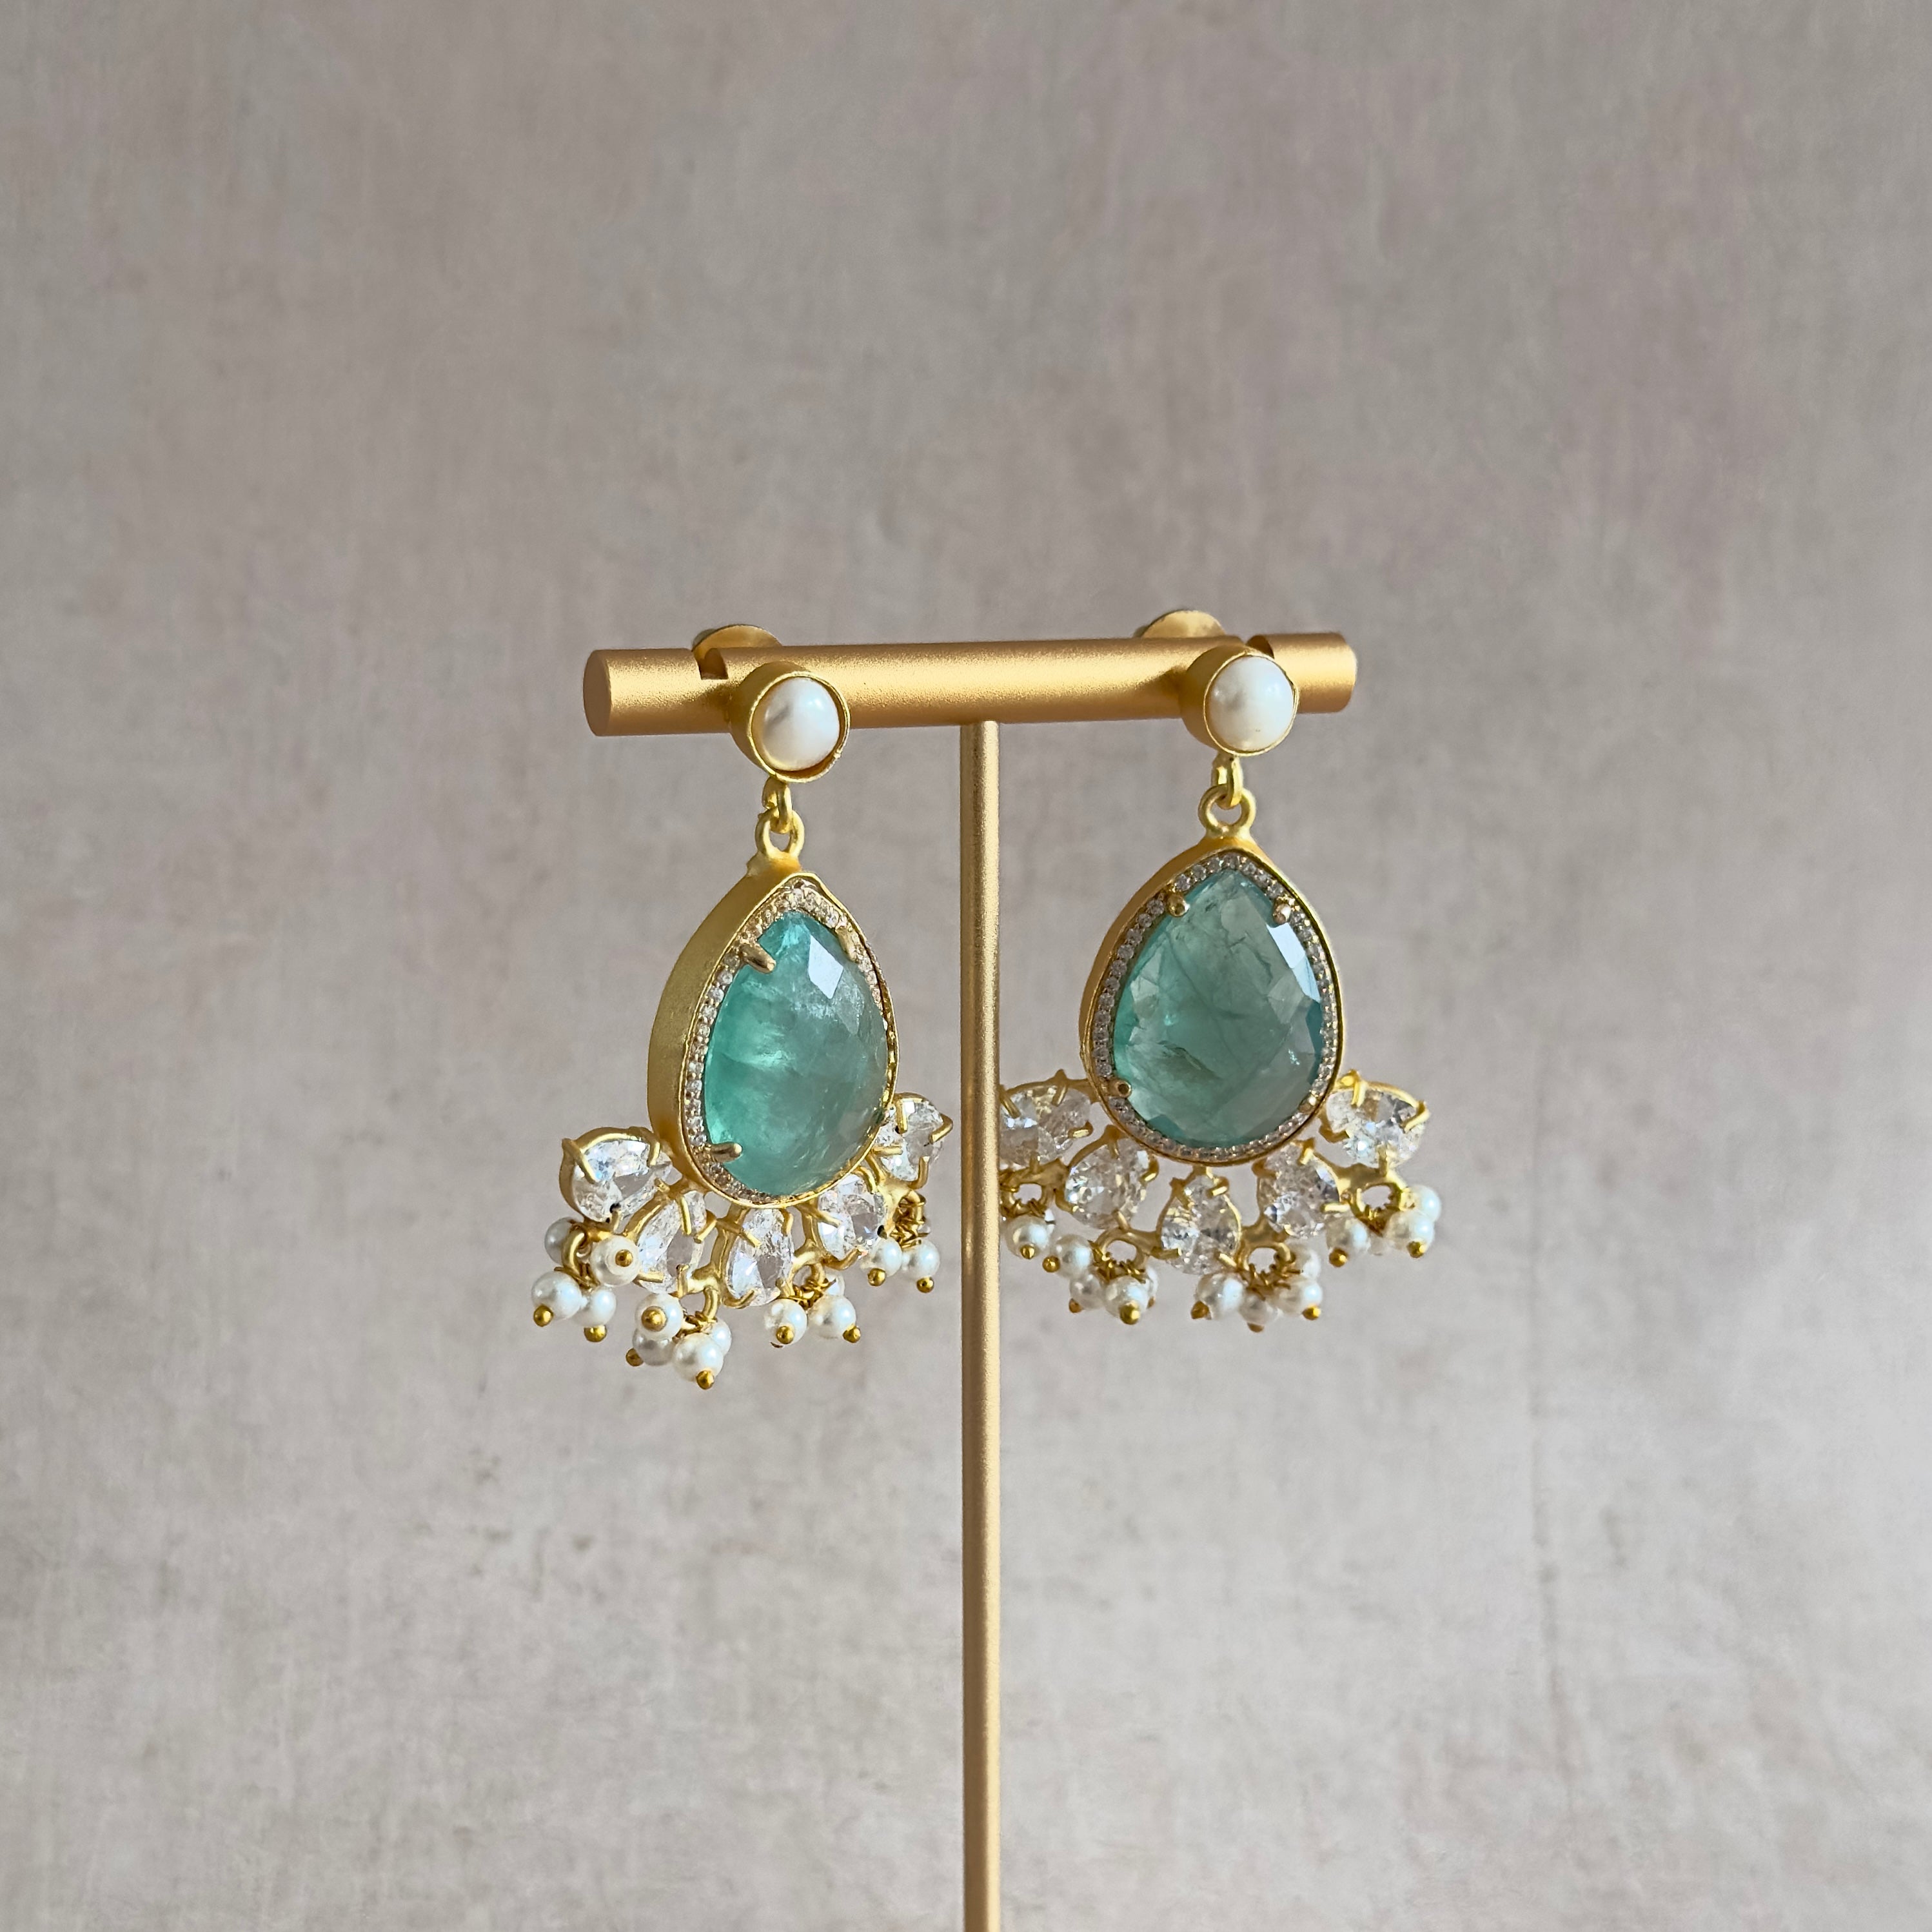 Indulge in the mesmerizing beauty of these Ciana Aqua Mint Pearl Drop Earrings. The stunning aquamarine crystals shimmer with elegance, while the pearl accent adds a touch of sophistication. Enhanced with sparkling cz crystals, these earrings will elevate any outfit with a touch of luxury.